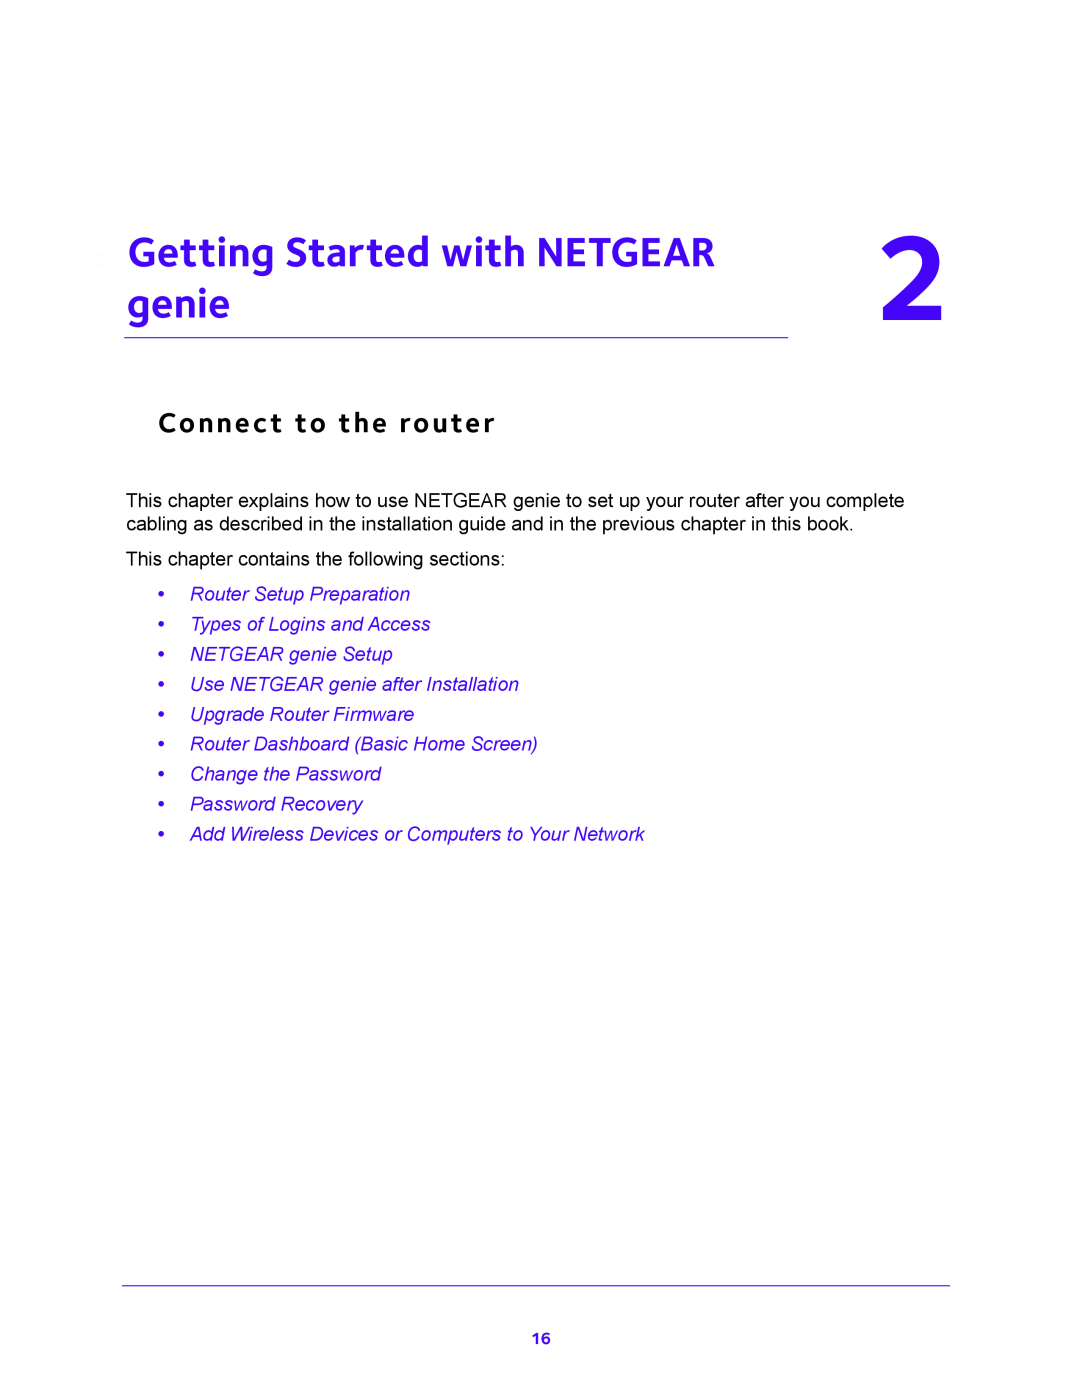 NETGEAR WNR200v4 Getting Started with NETGEAR, genie, Connect to the router, Change the Password Password Recovery 